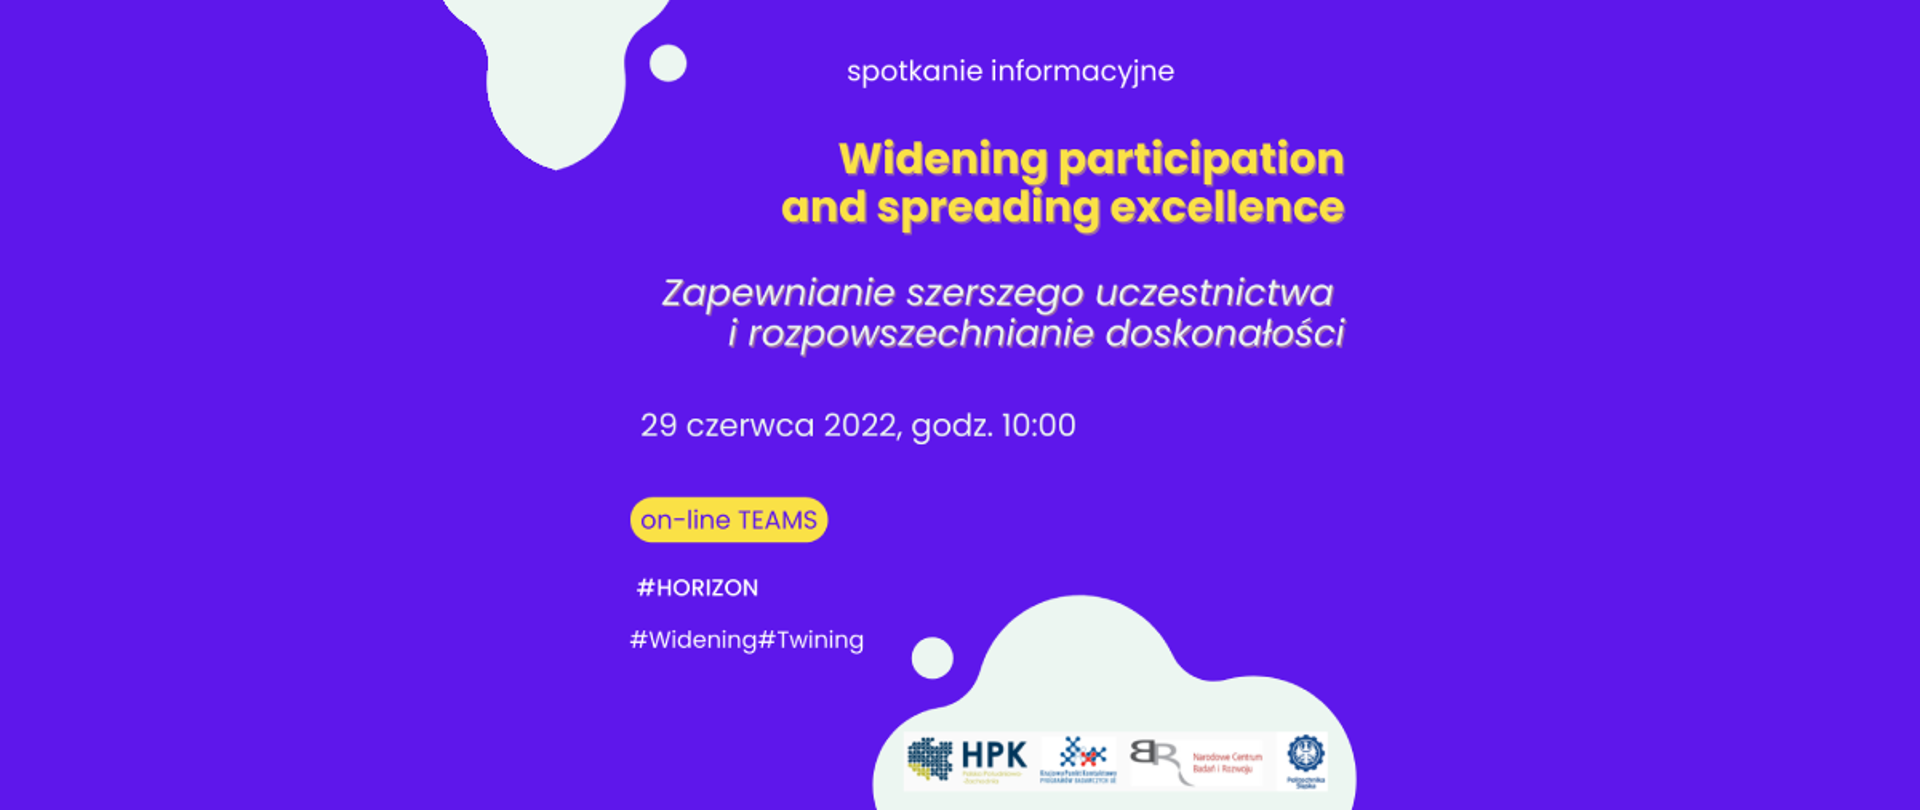 Spotkanie informacyjne
Widening participation and spreading excellence